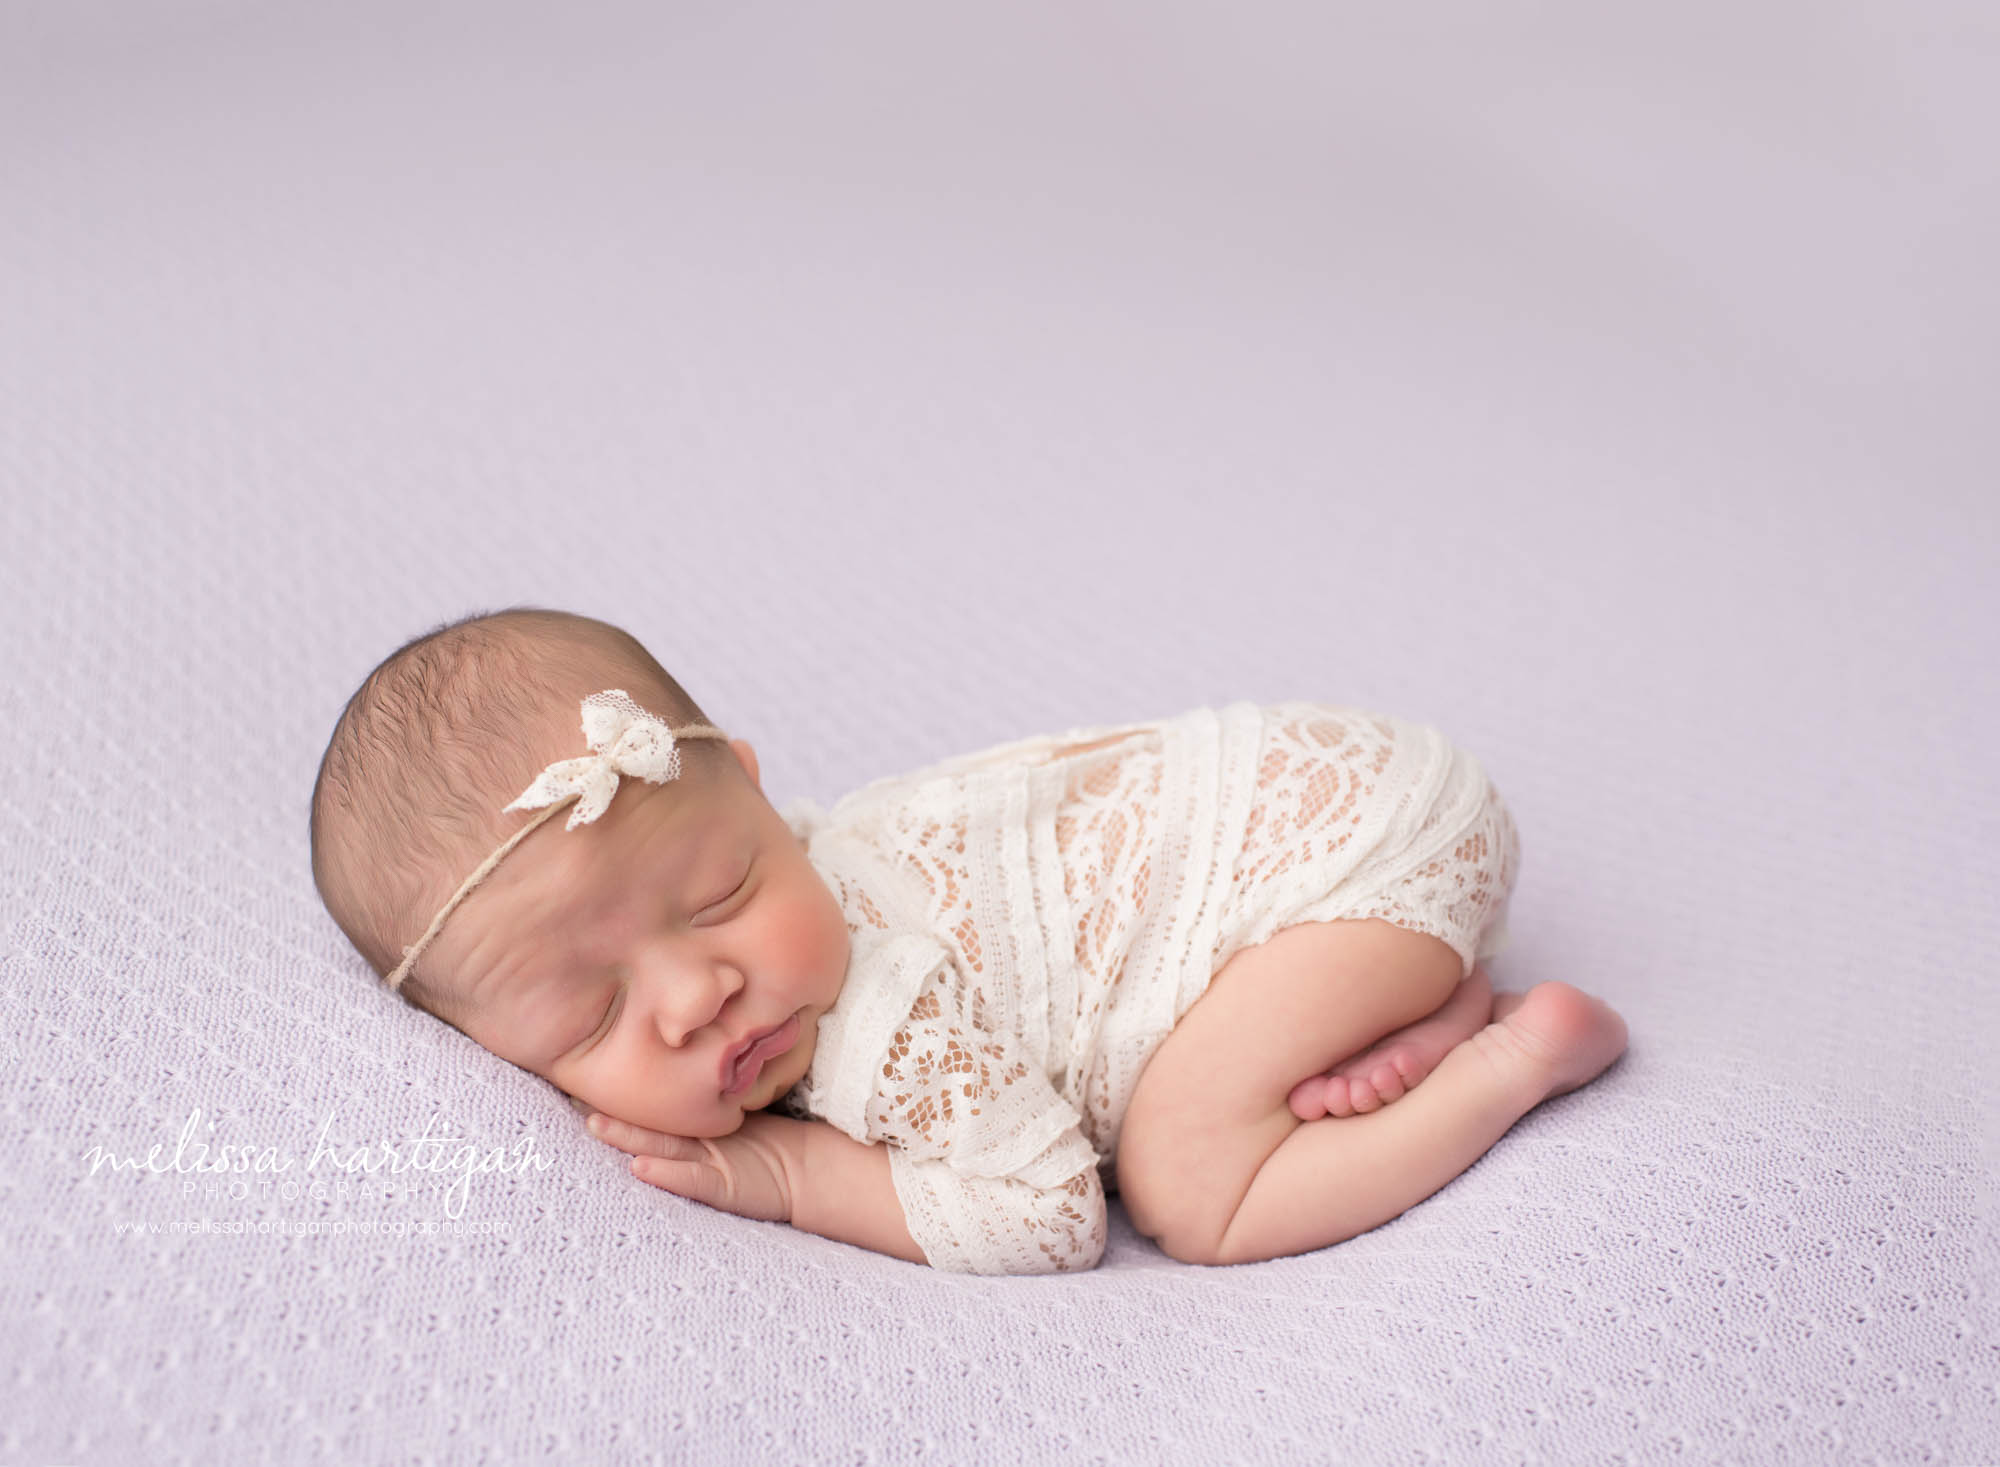 Baby girl wearing lace romper posed bum up on light purple blanket newborn pictures from baby studio session